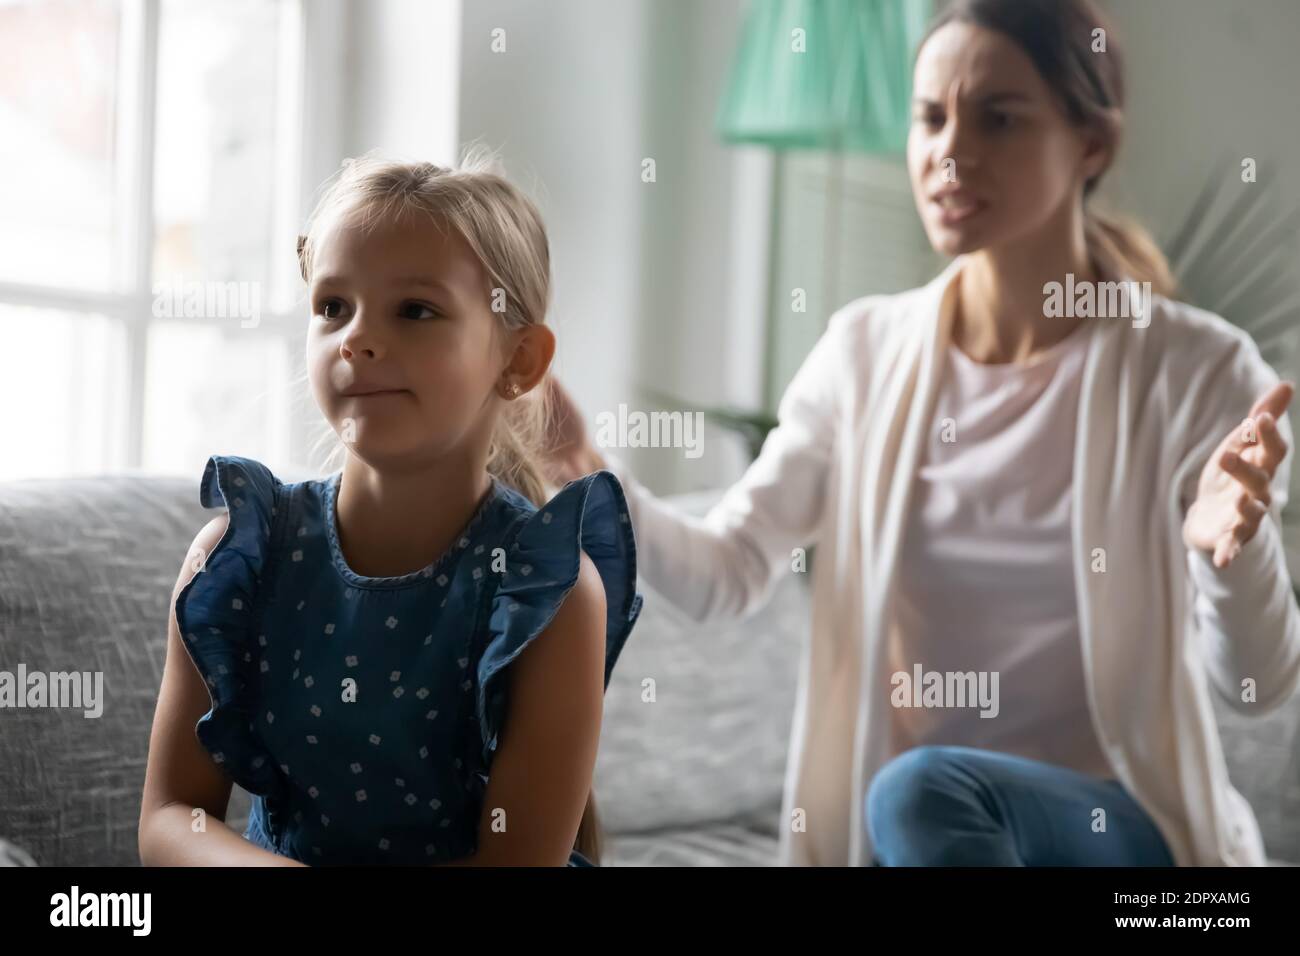 Close up angry strict mother scolding stubborn naughty daughter Stock Photo